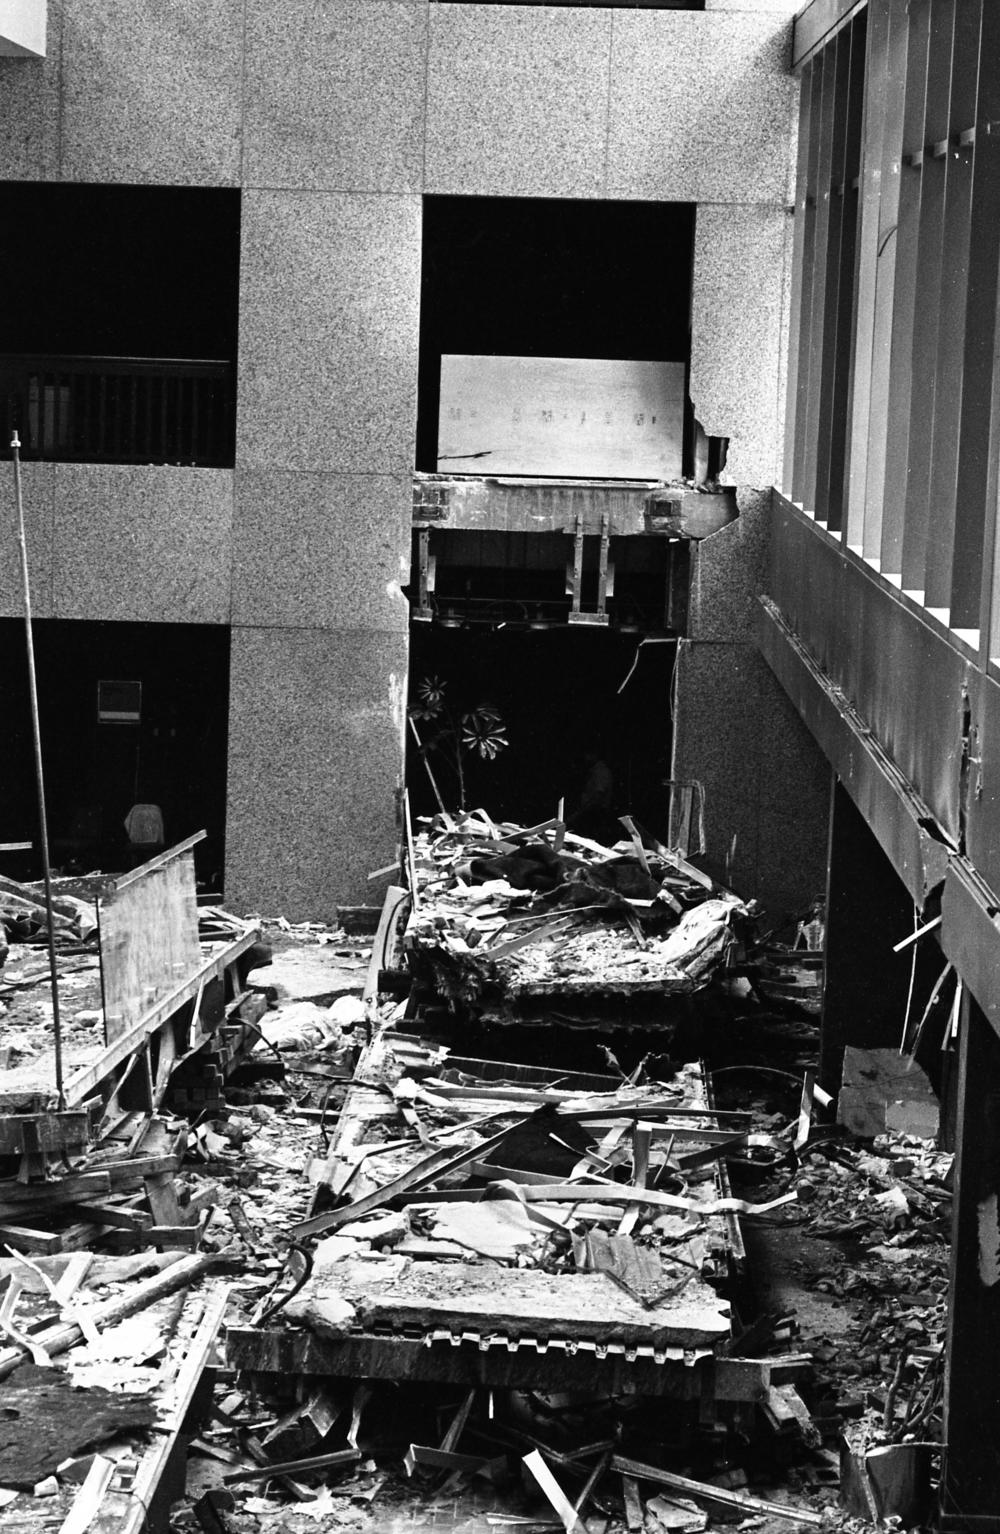 Civil engineers still closely study the deadly structural failure at the Hyatt Regency. It serves as a cautionary tale for similar designs.